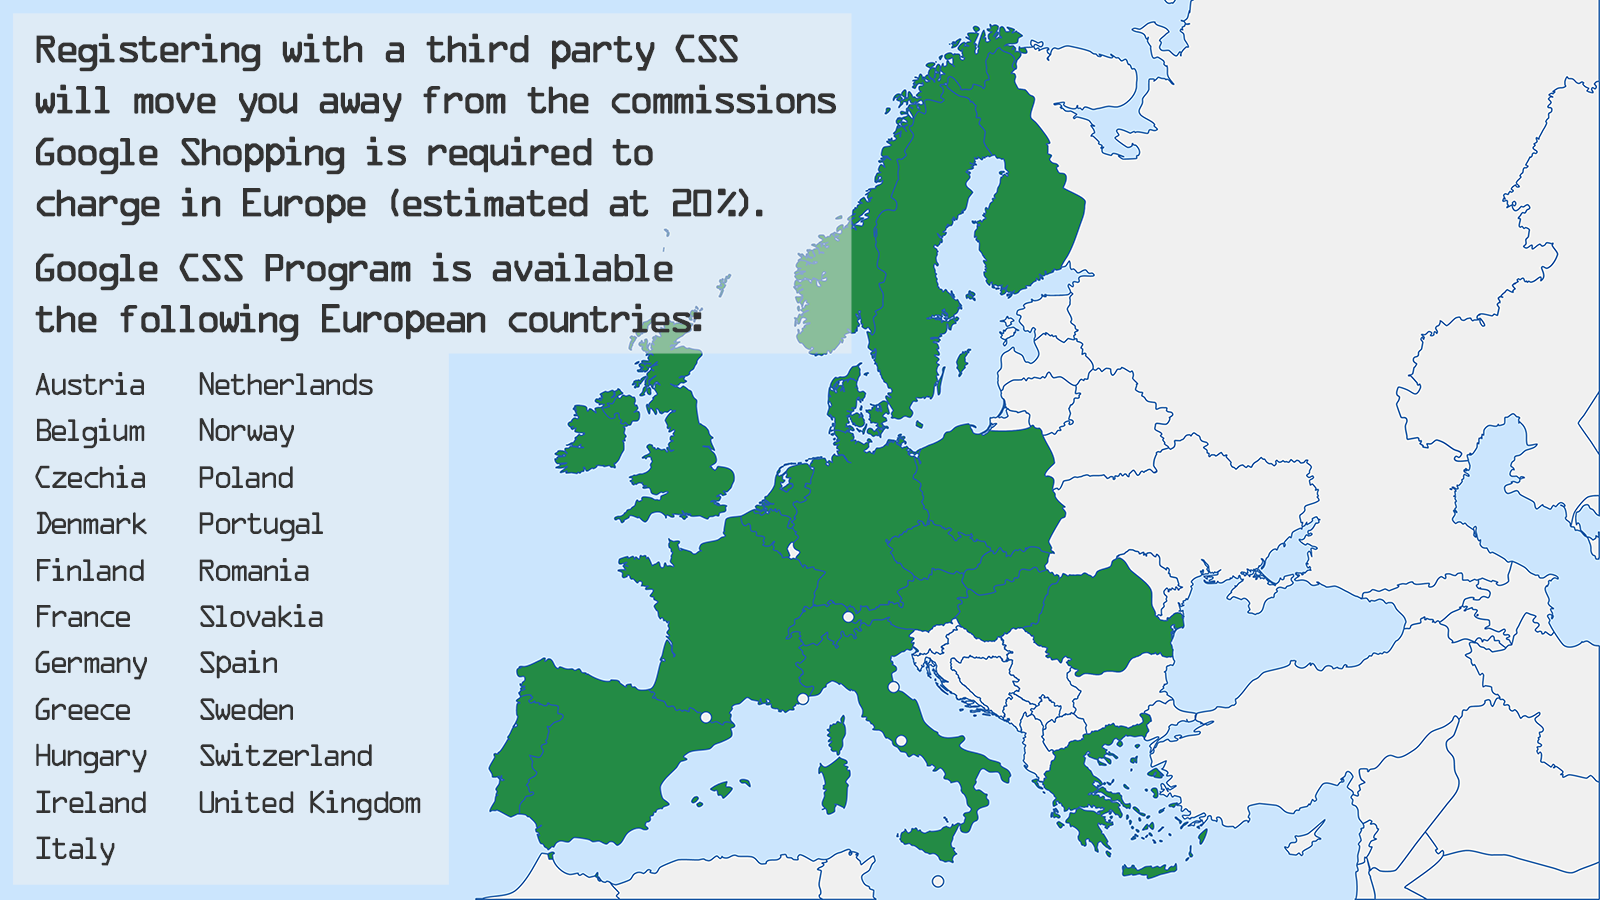 Google CSS Program is available in 21 European countries